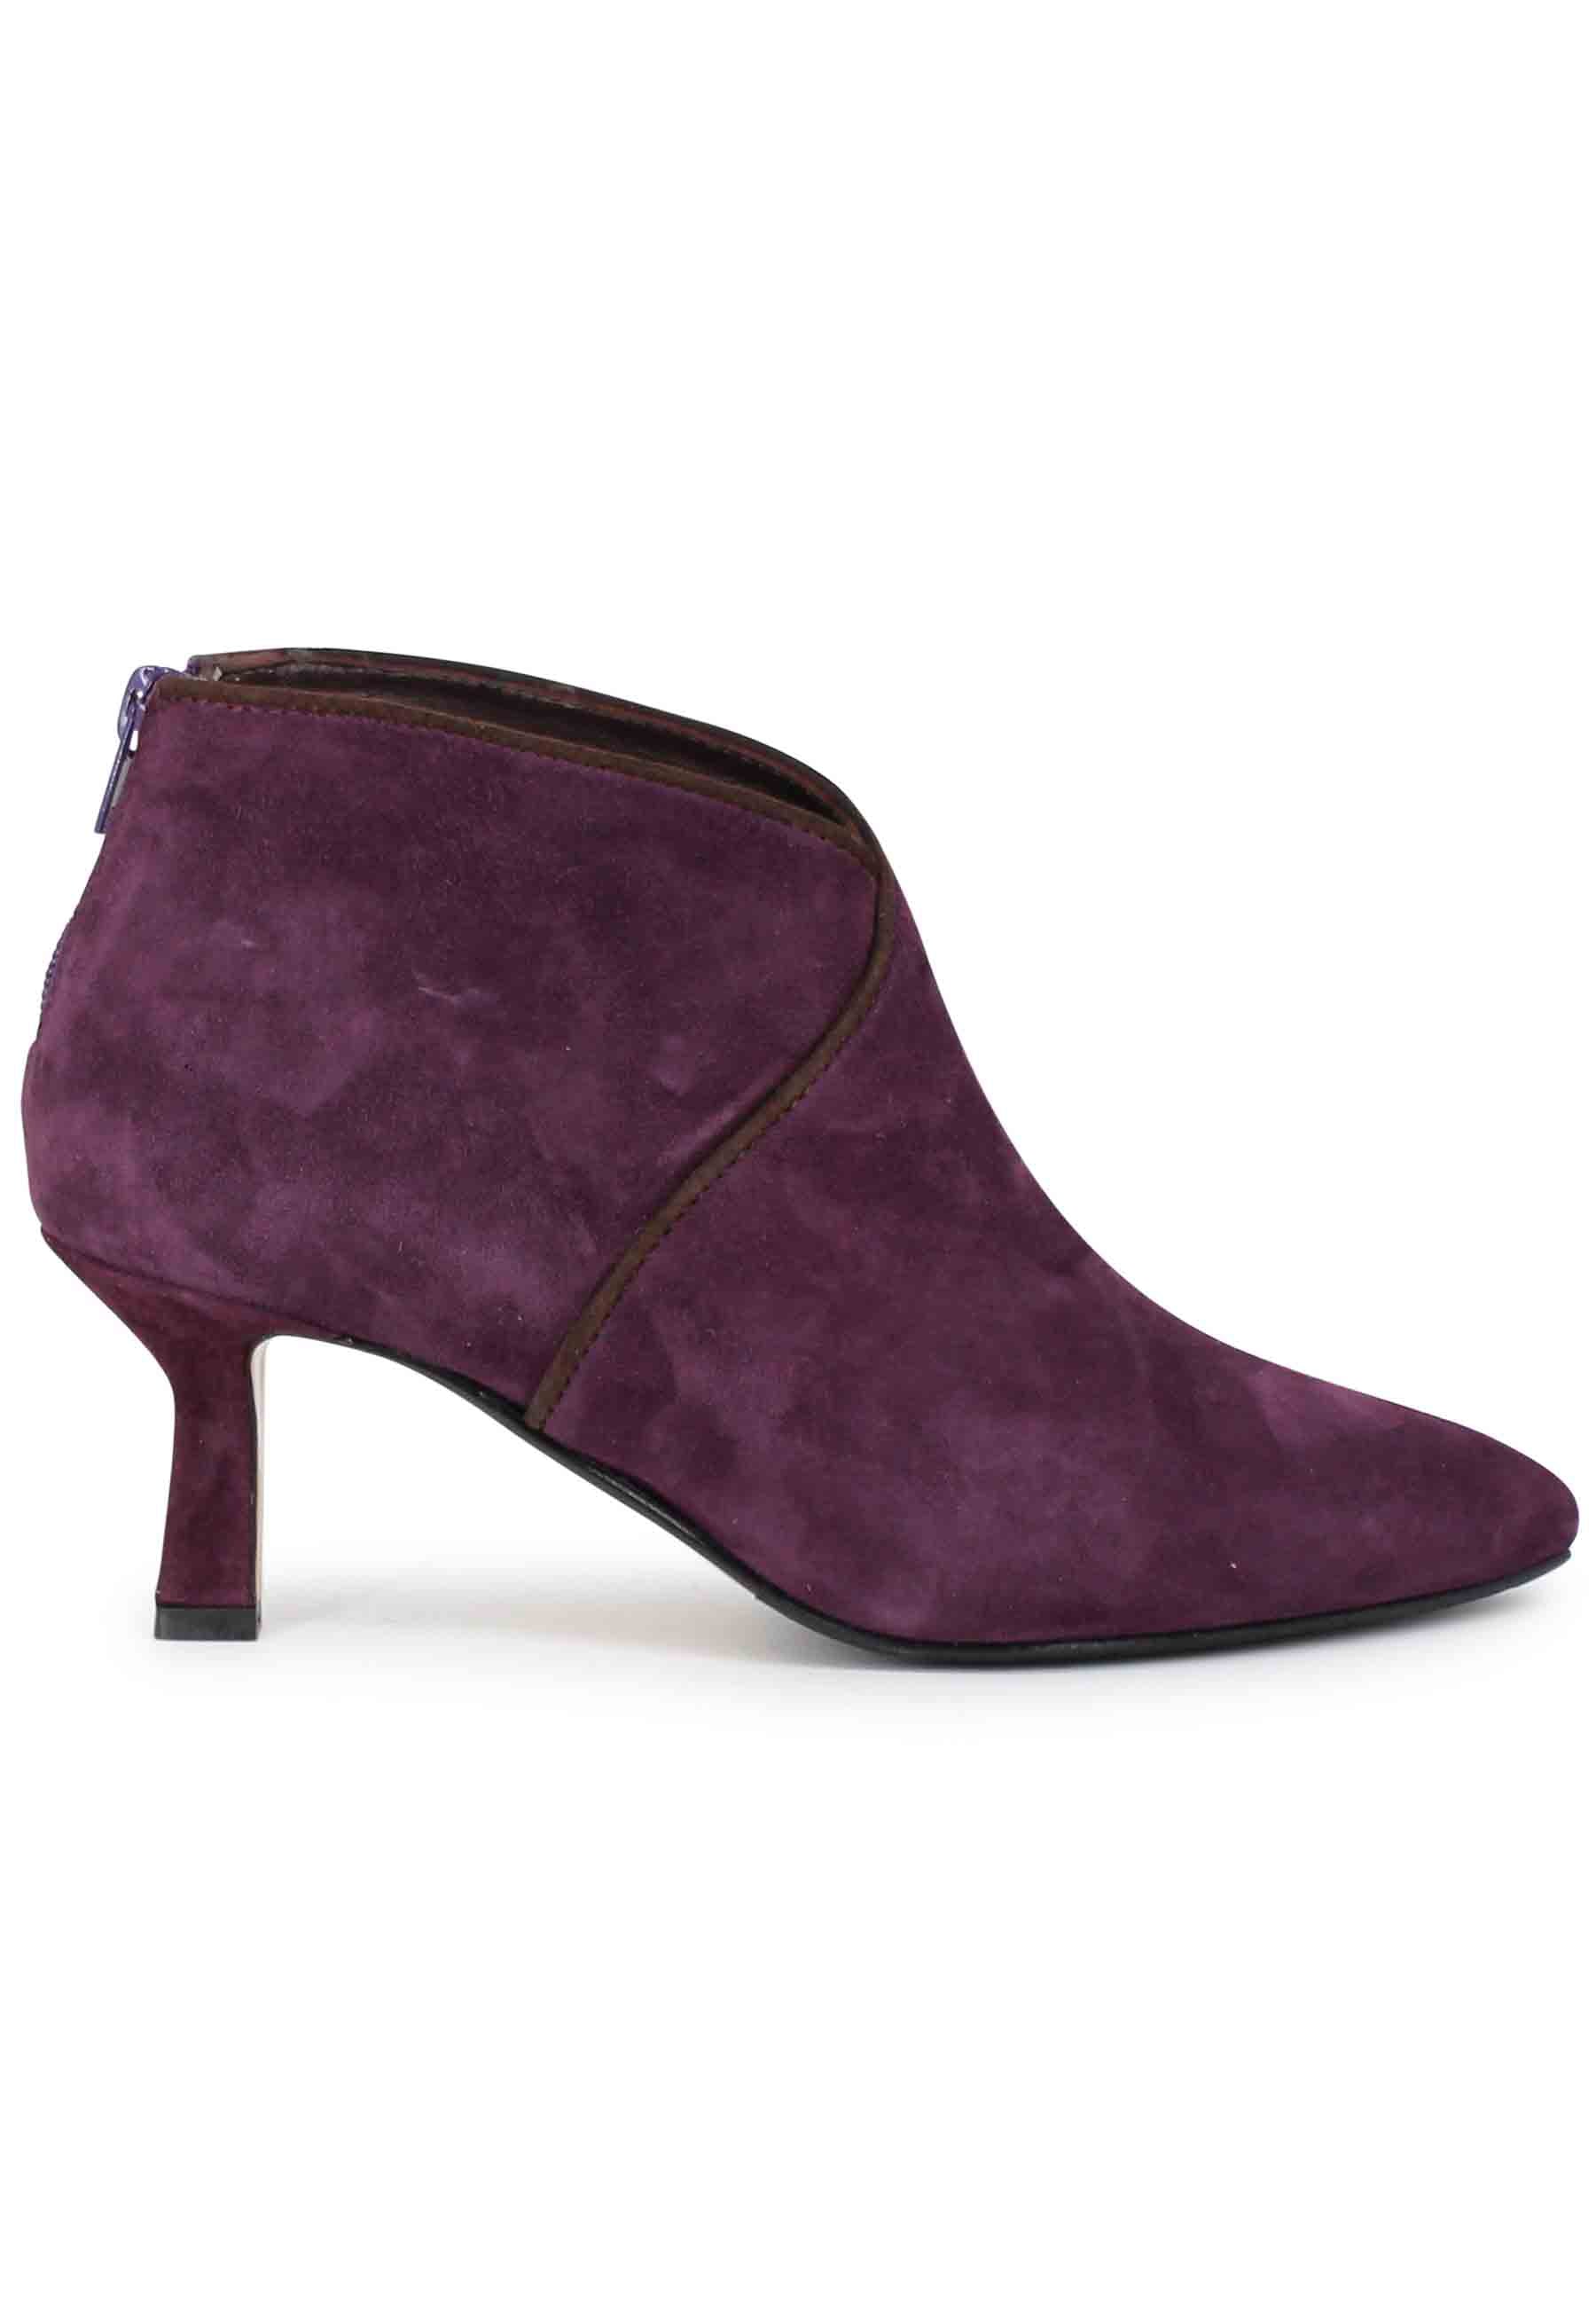 Women's plum suede ankle boots with back zip